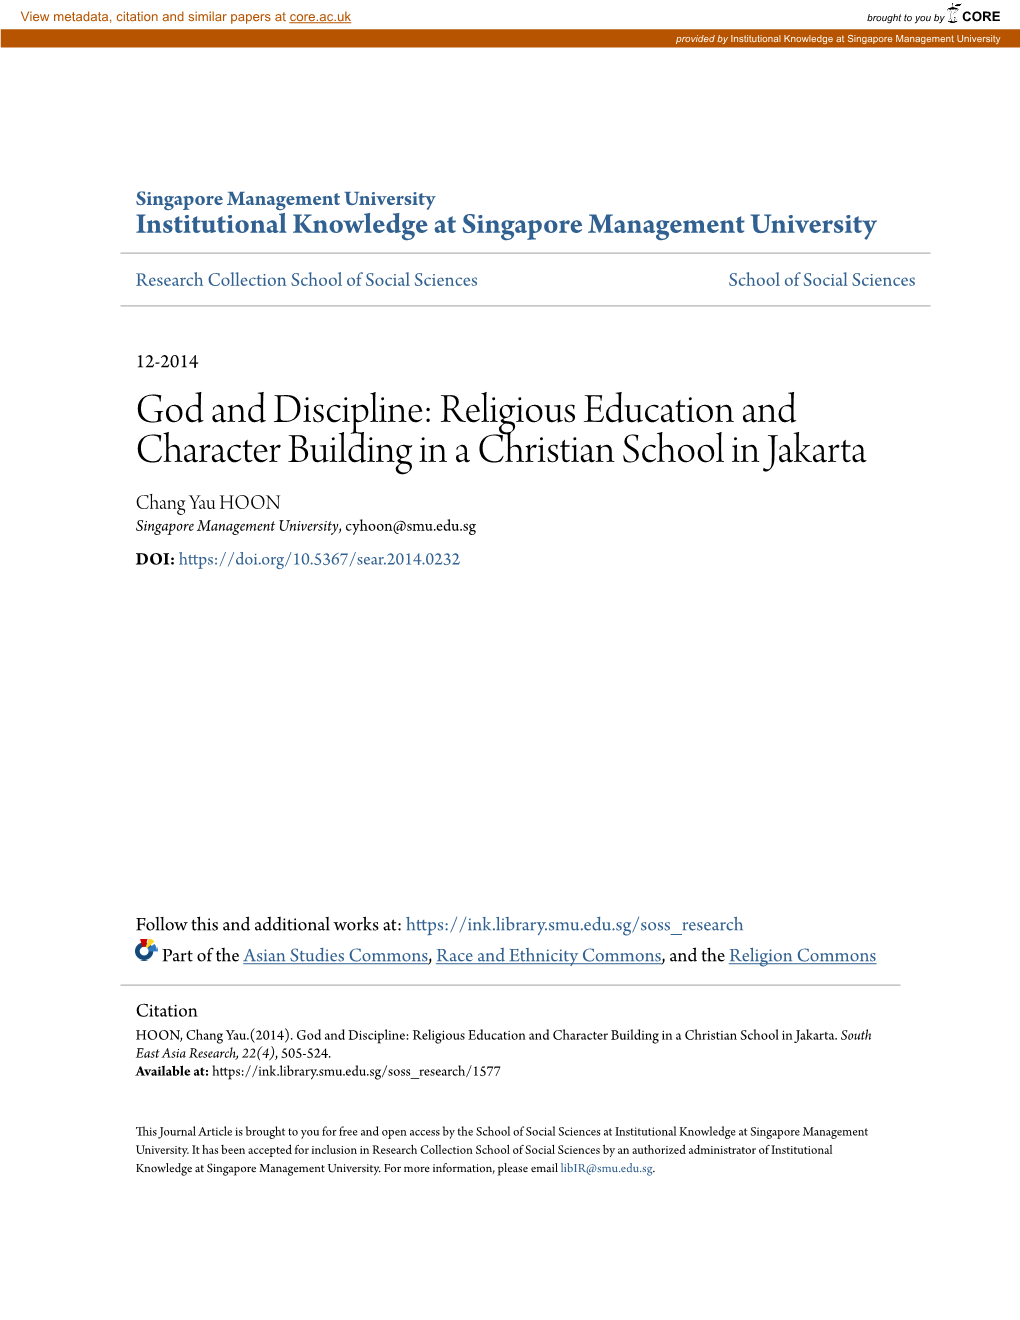 God and Discipline: Religious Education and Character Building in a Christian School in Jakarta